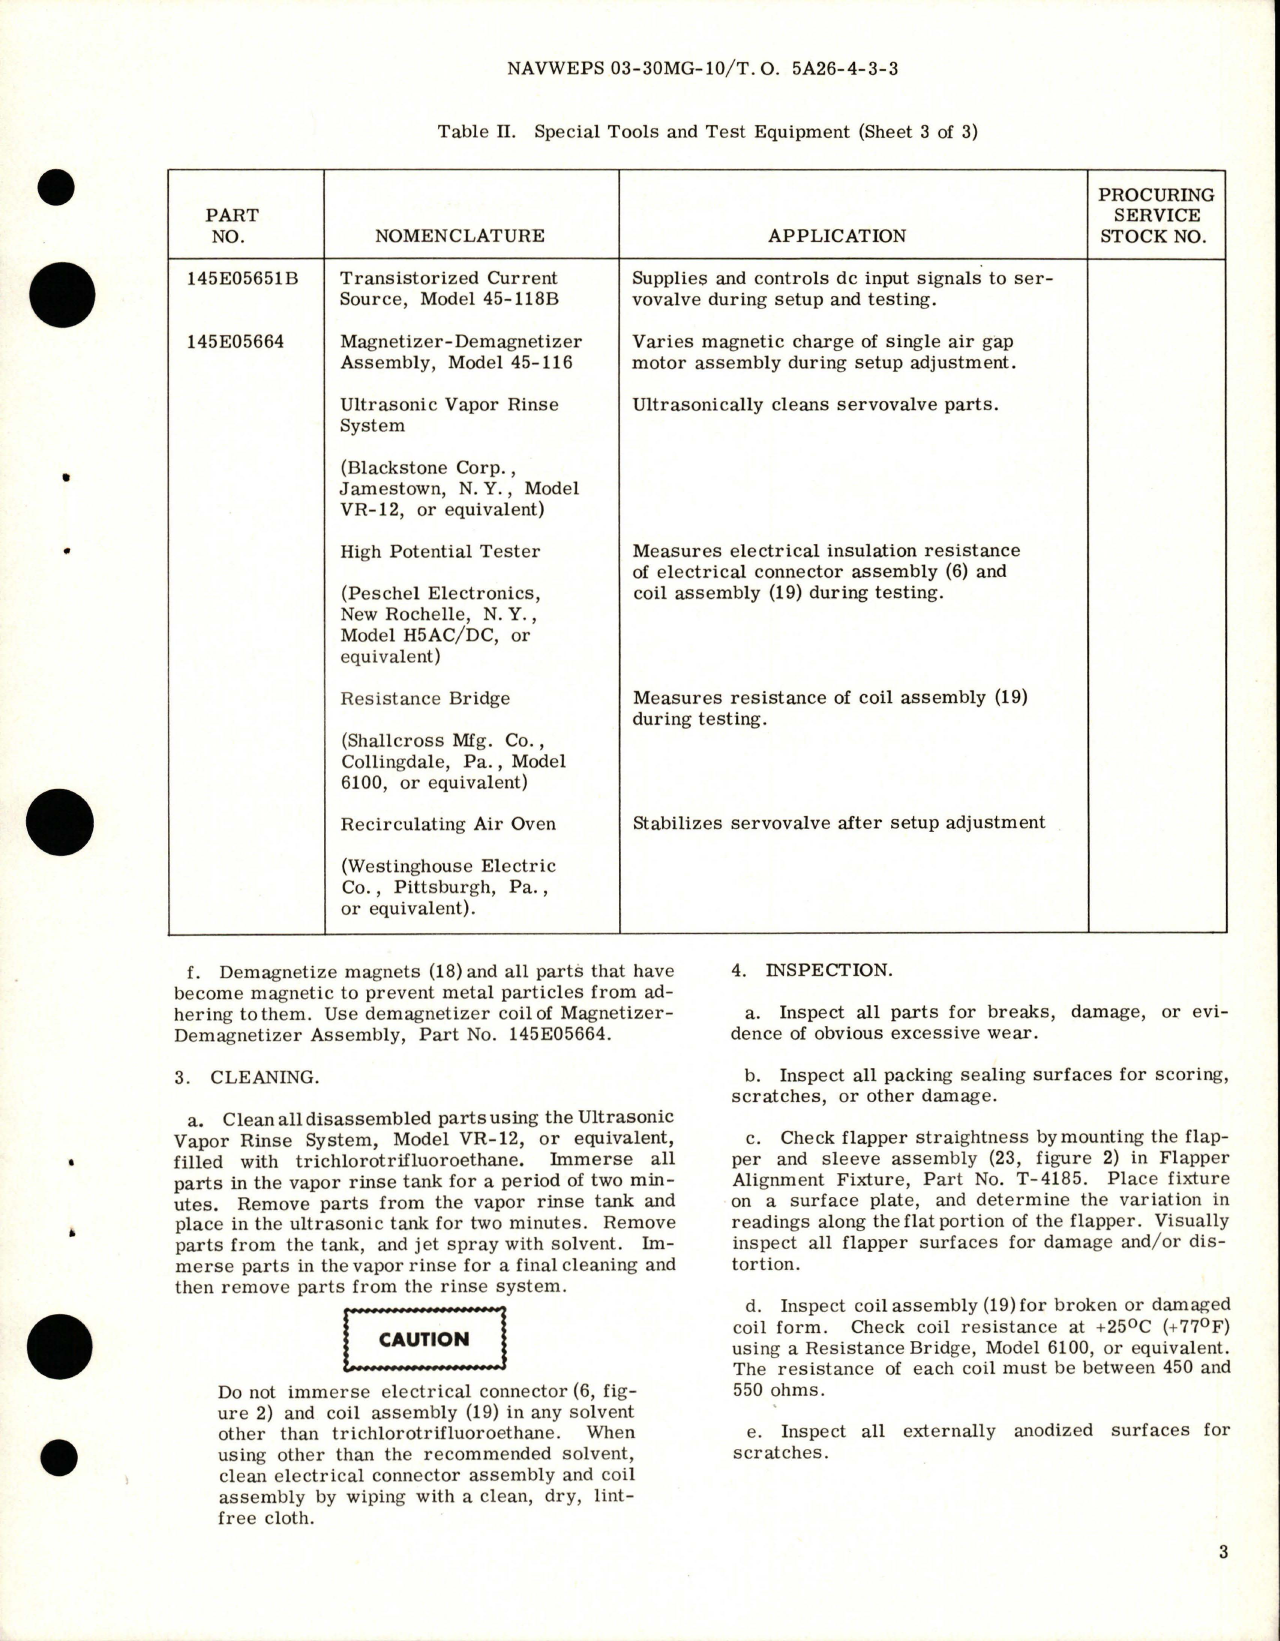 Sample page 5 from AirCorps Library document: Overhaul with Parts Breakdown for Servovalve - Part 010-20480 - Model 2176A-1